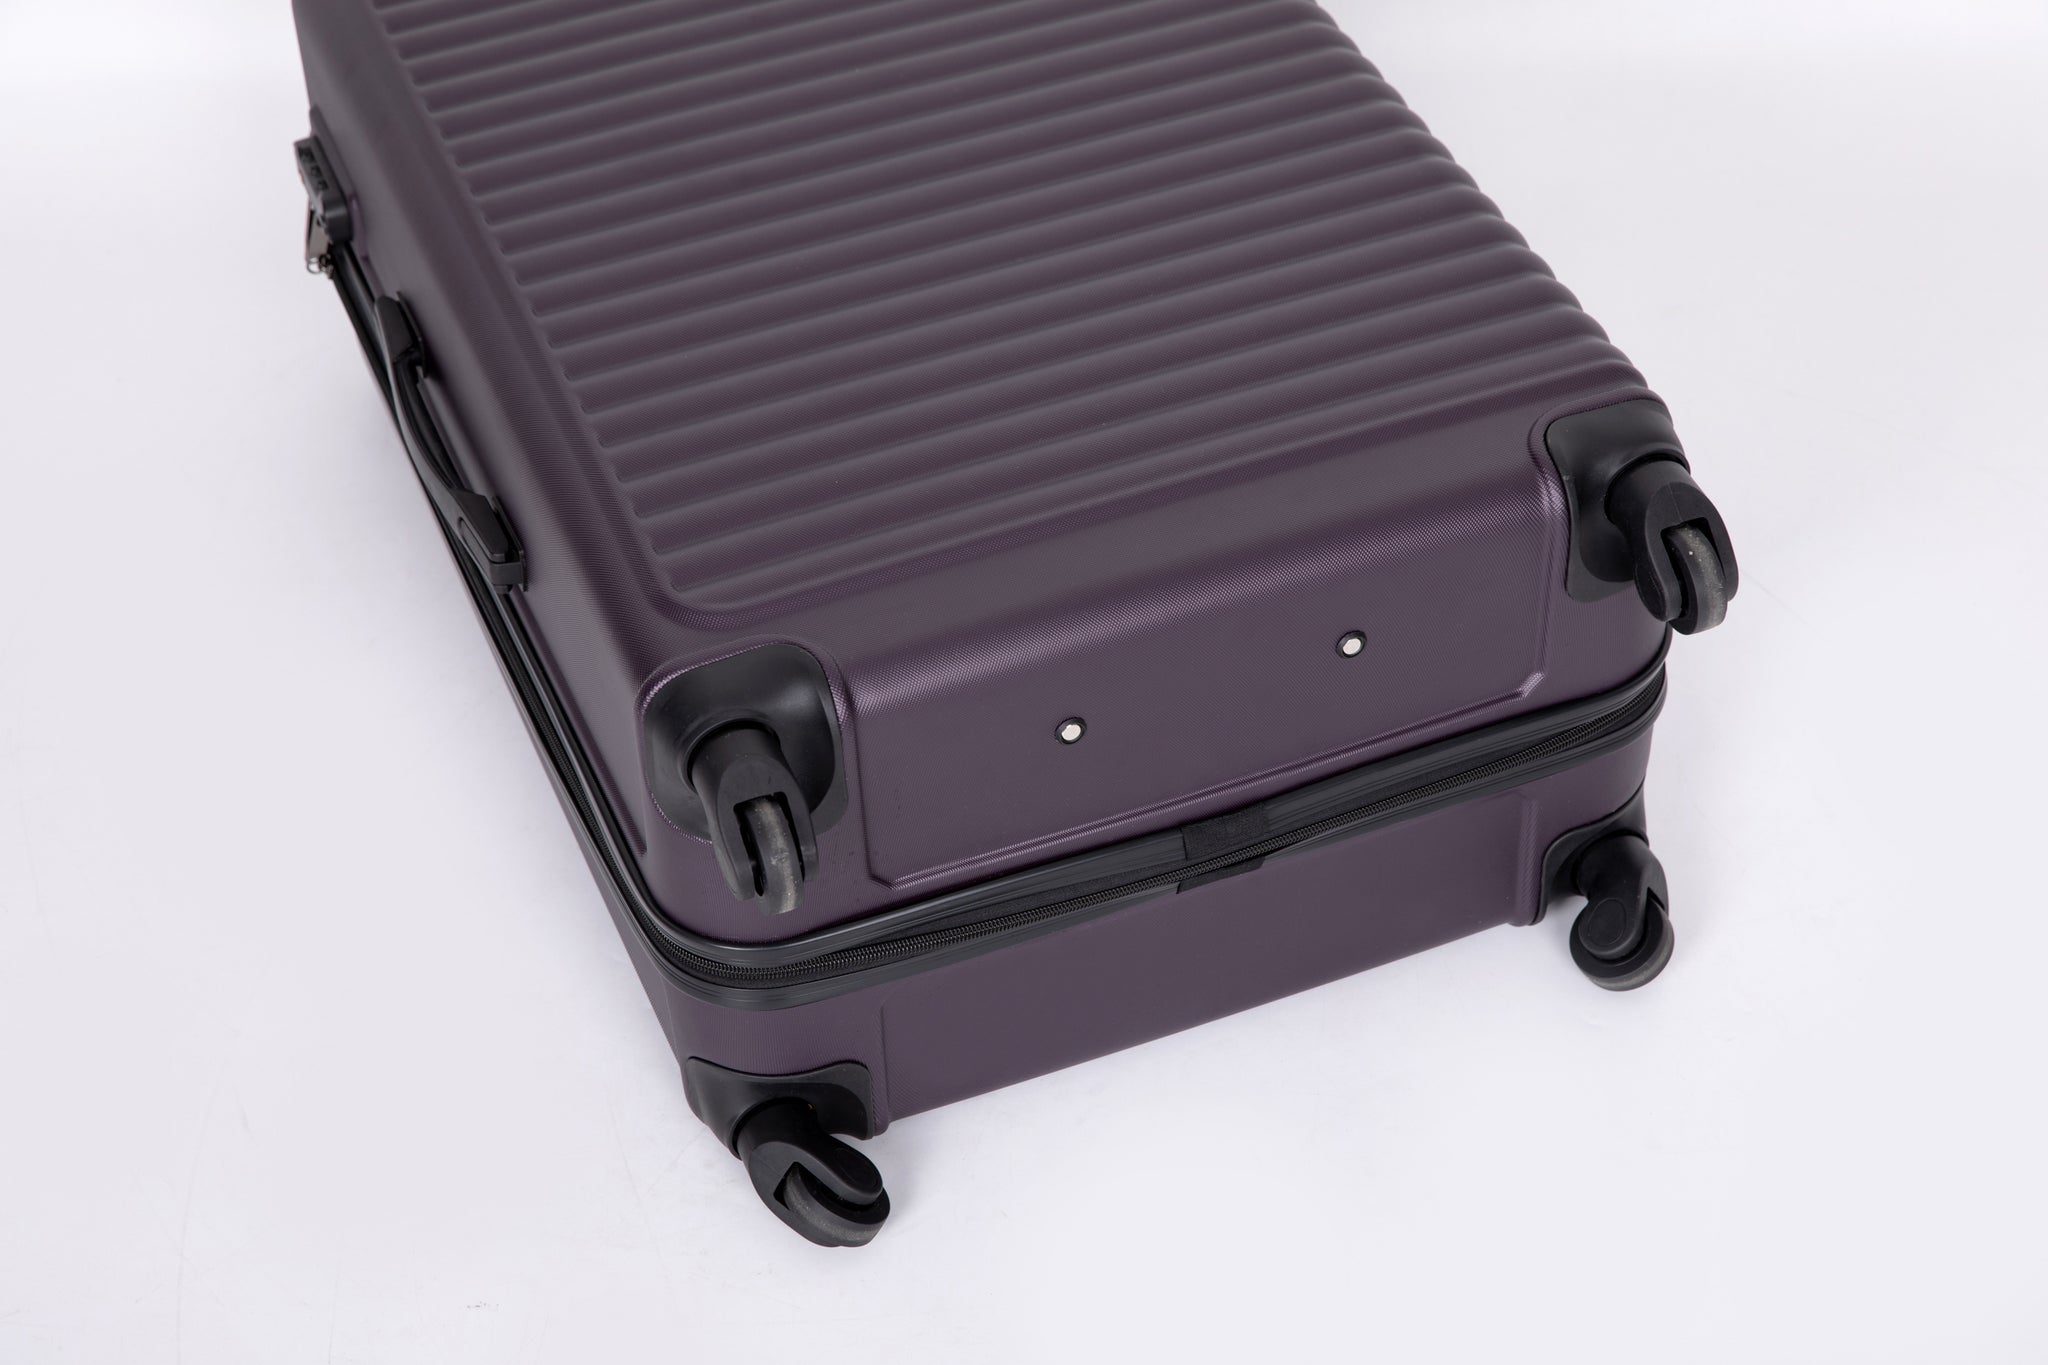 3 Piece Luggage Sets ABS Lightweight Suitcase with Two purple-abs